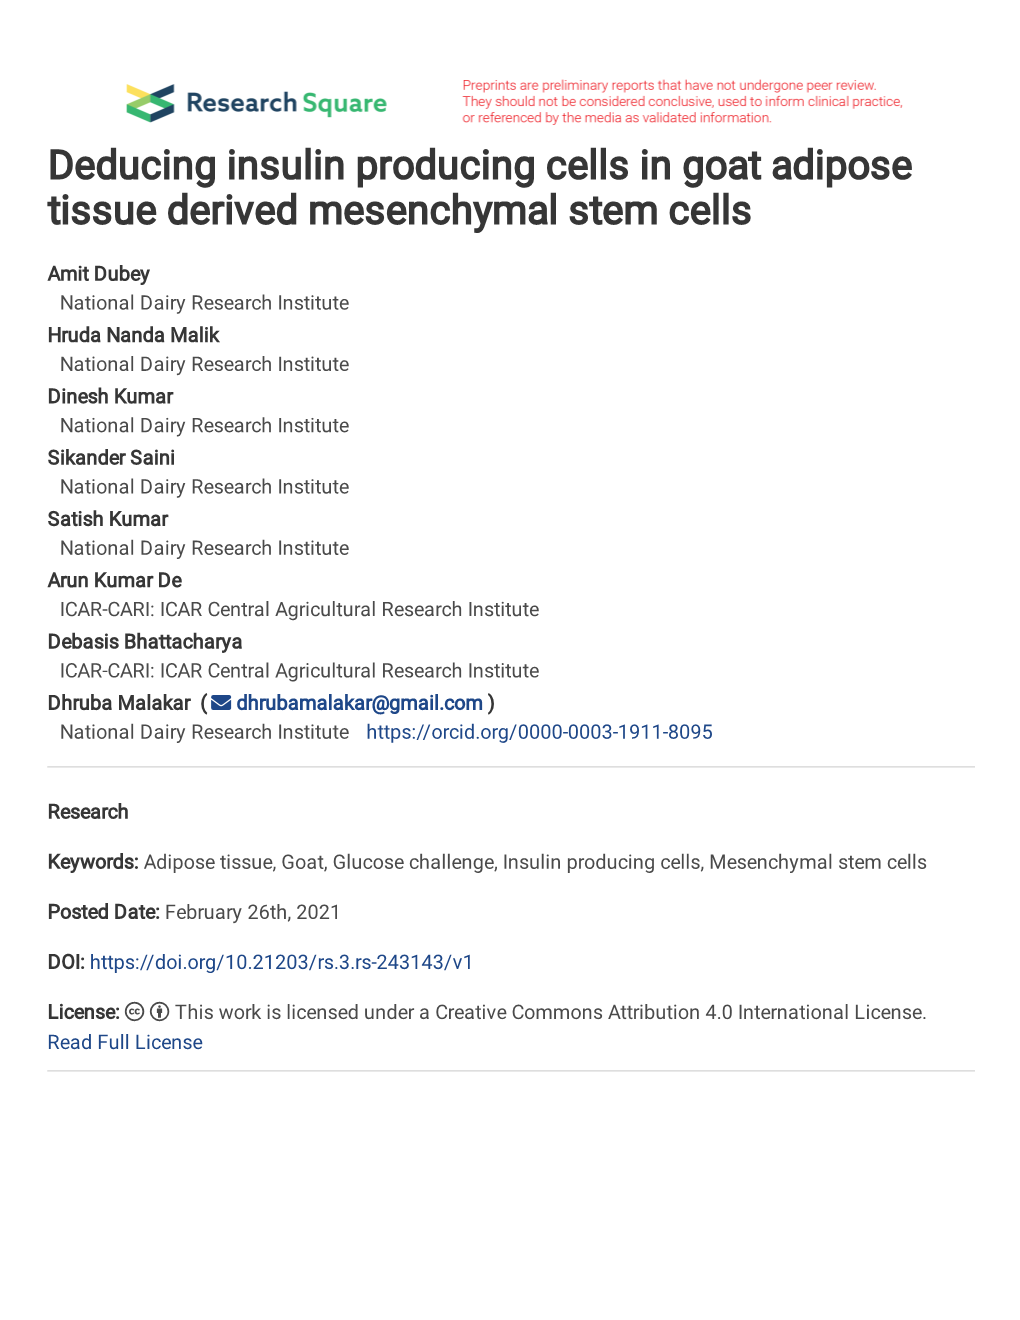 Deducing Insulin Producing Cells in Goat Adipose Tissue Derived Mesenchymal Stem Cells